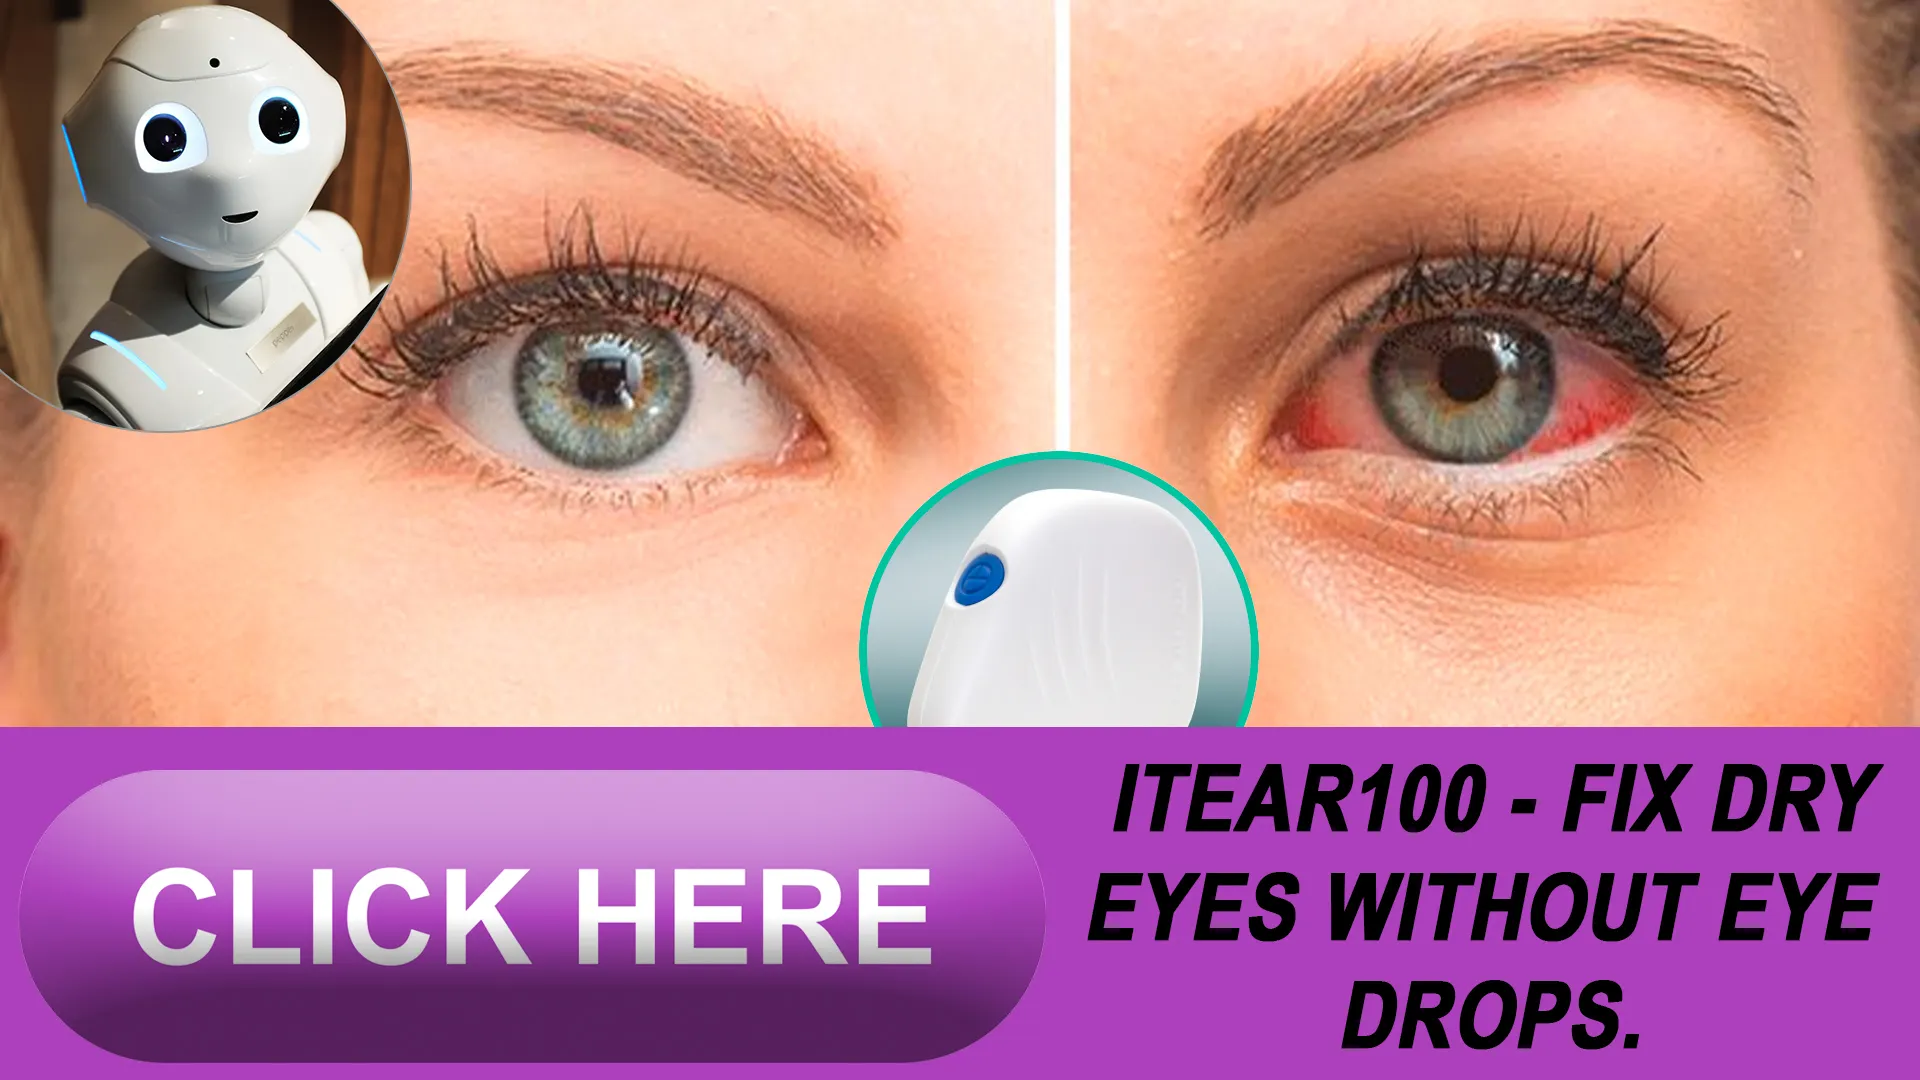 Comparing iTear100 to Common Eye Drop Brands